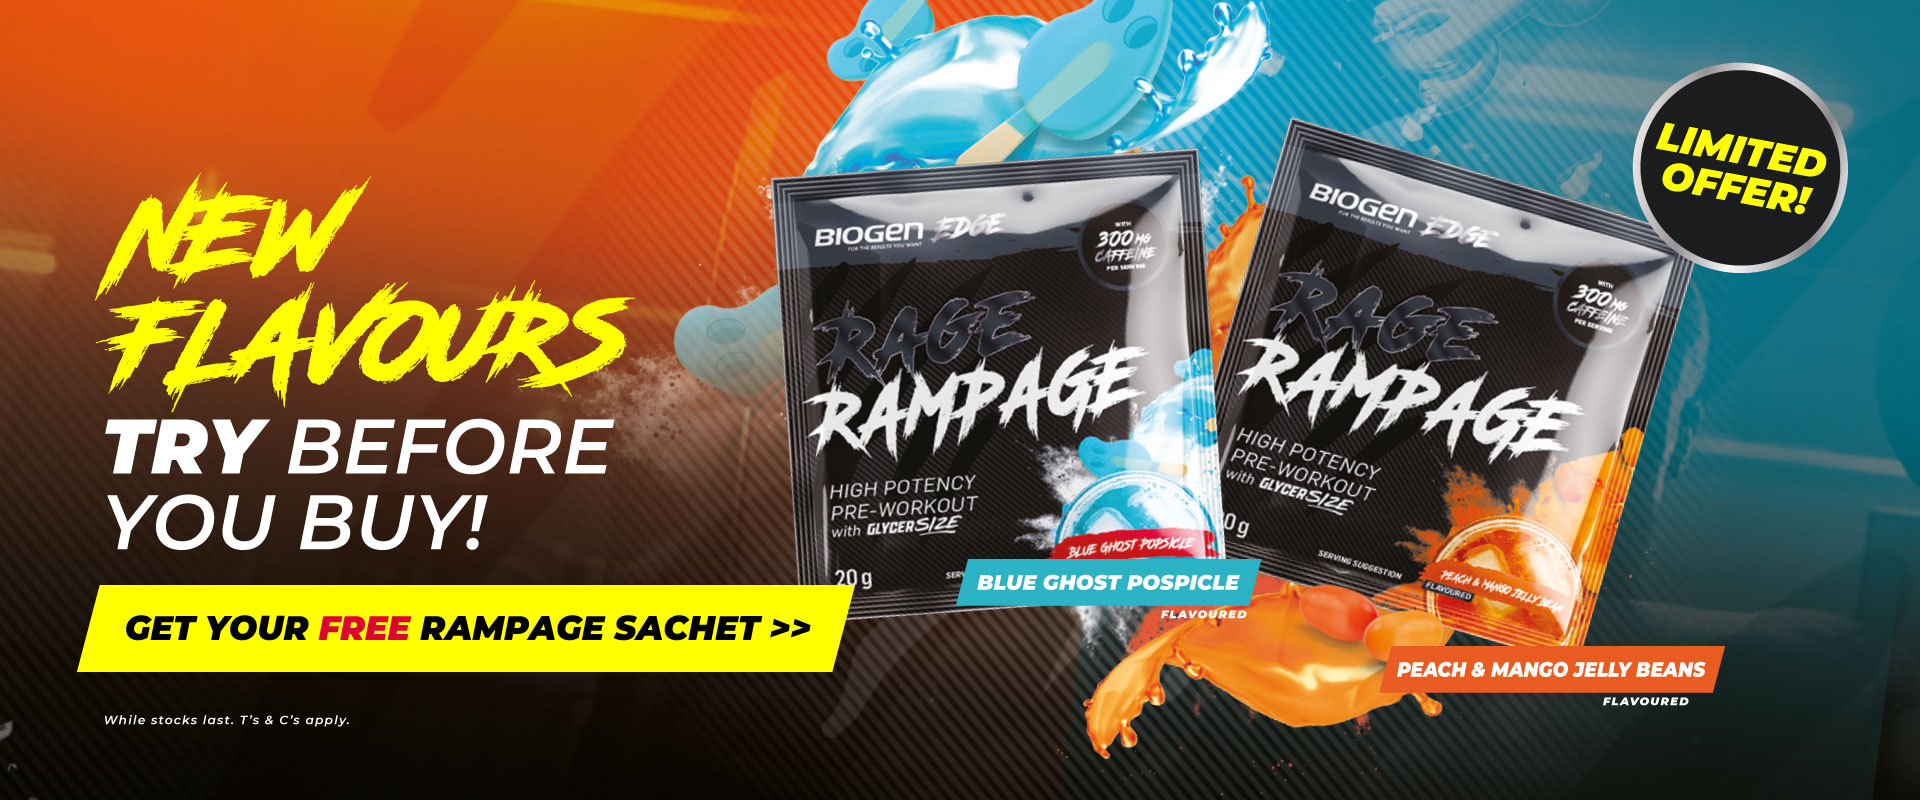 Rage Rampage New Flavours - Try Before You Buy